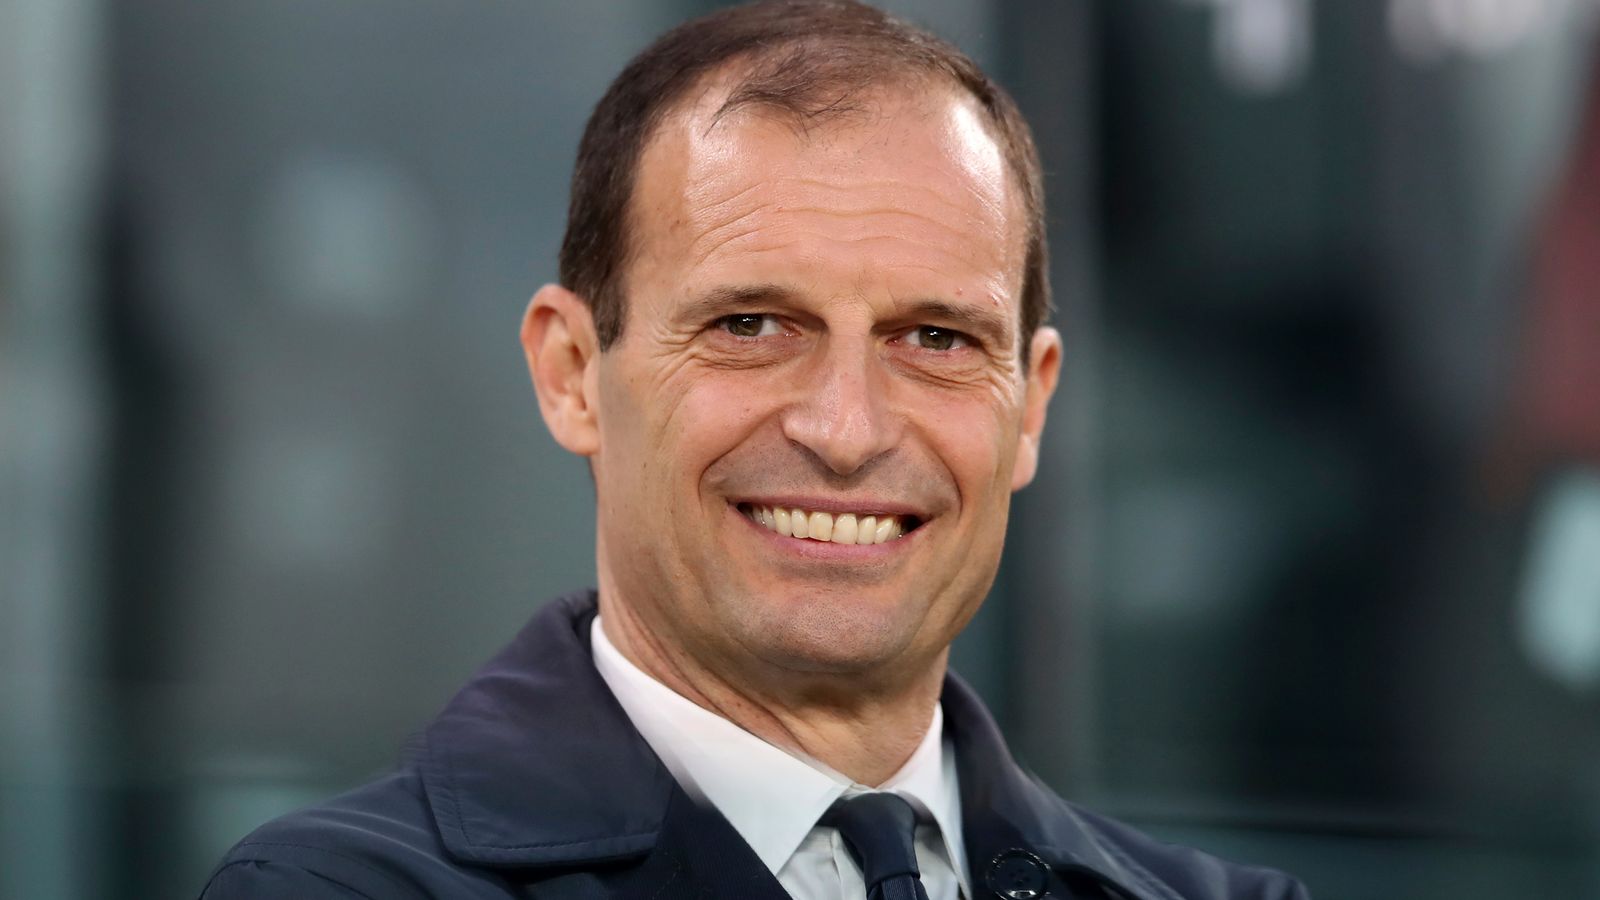 Massimiliano Allegri re-appointed as Juventus manager after Andrea Pirlo  sacking | Football News | Sky Sports